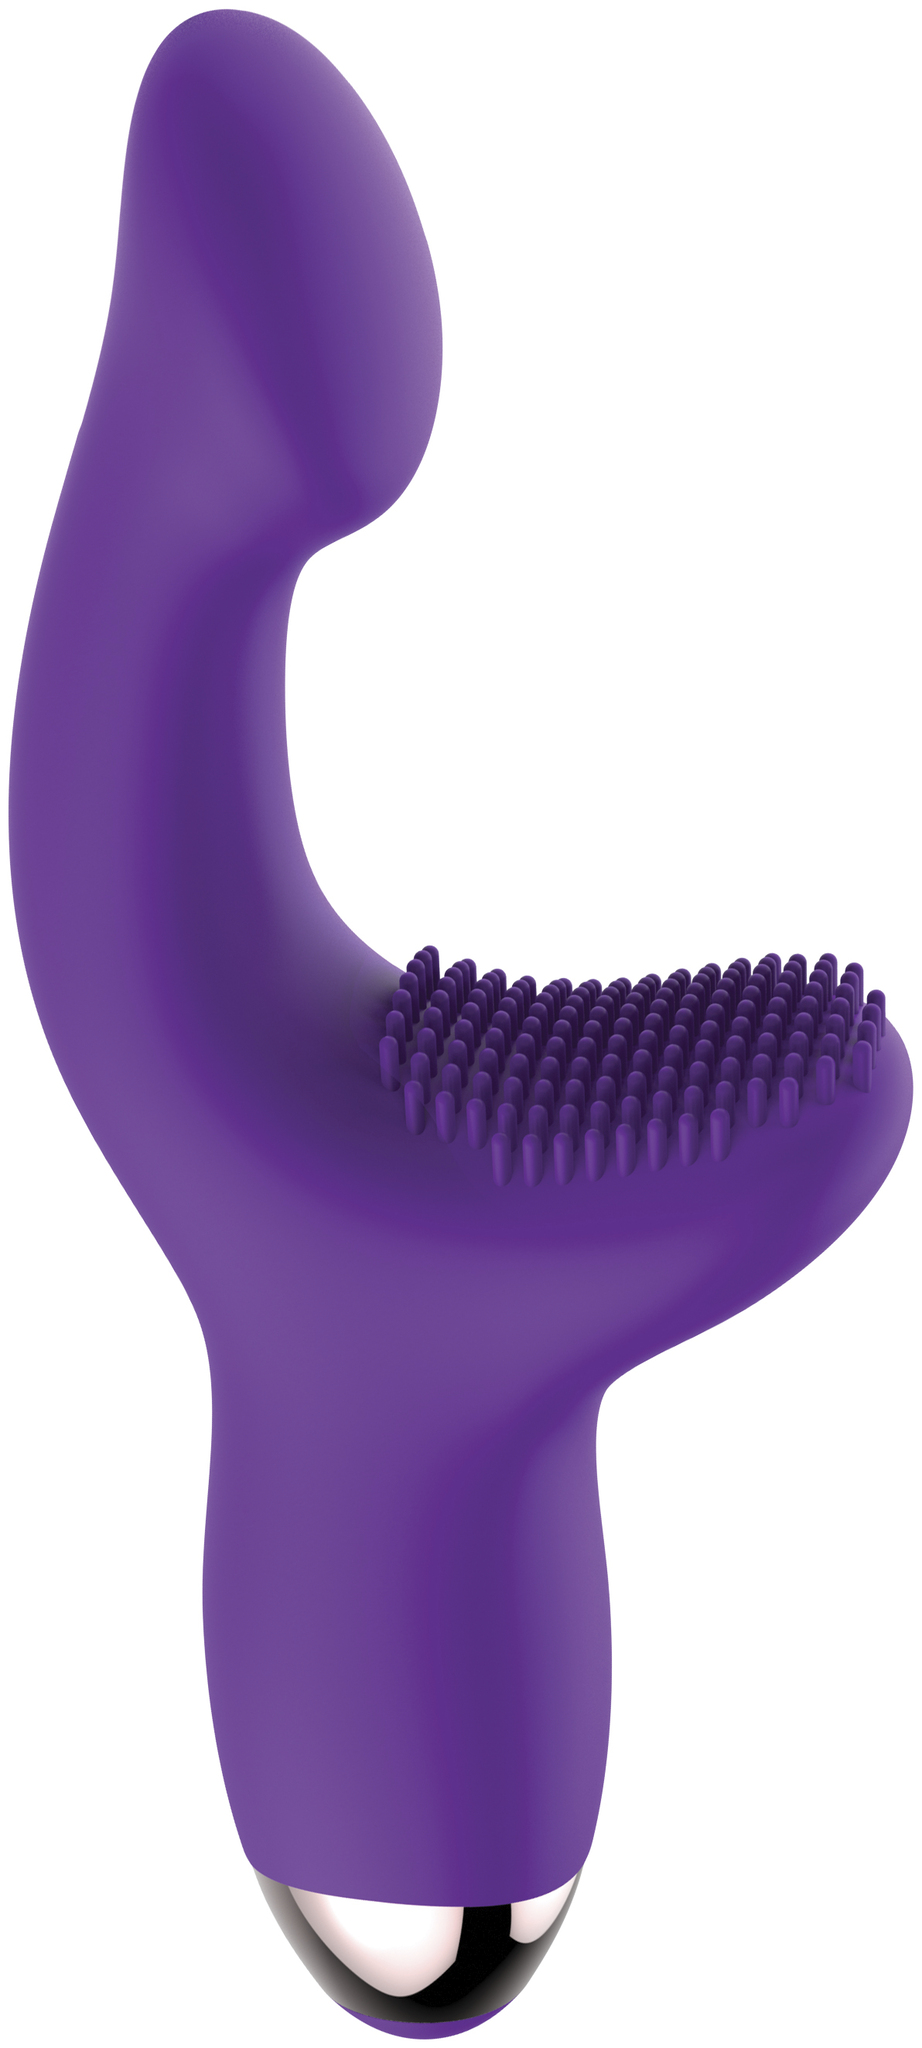 G SPOT PLEASER SILICONE - RECHARGEABLE